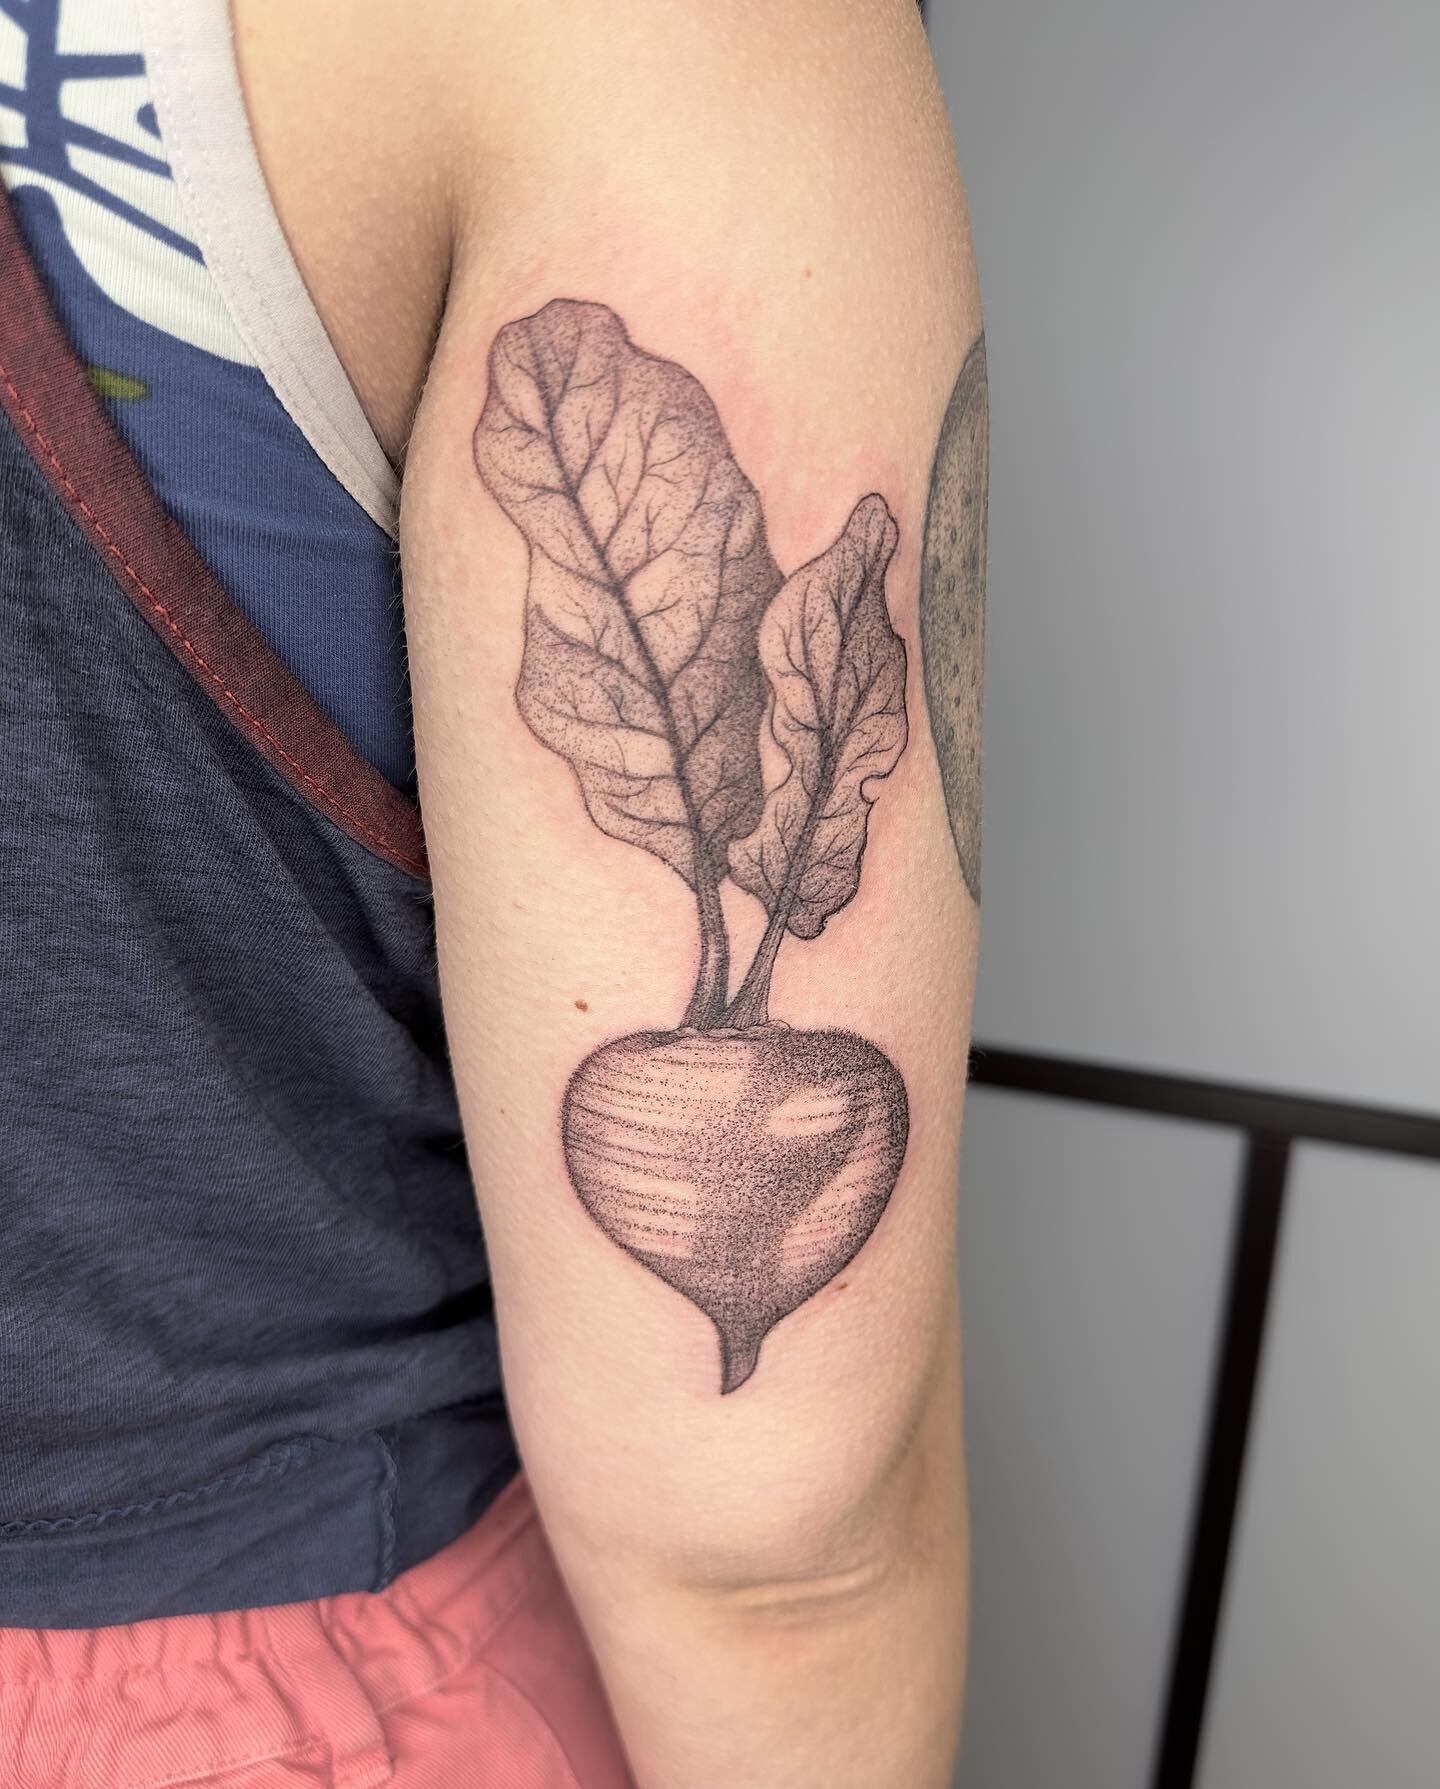 A beet for b! Thank you ❤️ &ldquo;The beet is in honor of my dad! He's Russian, and we have a tradition of cooking borscht together whenever I'm visiting.&rdquo; #phillytattoo #phillytattoo #brooklytattoo